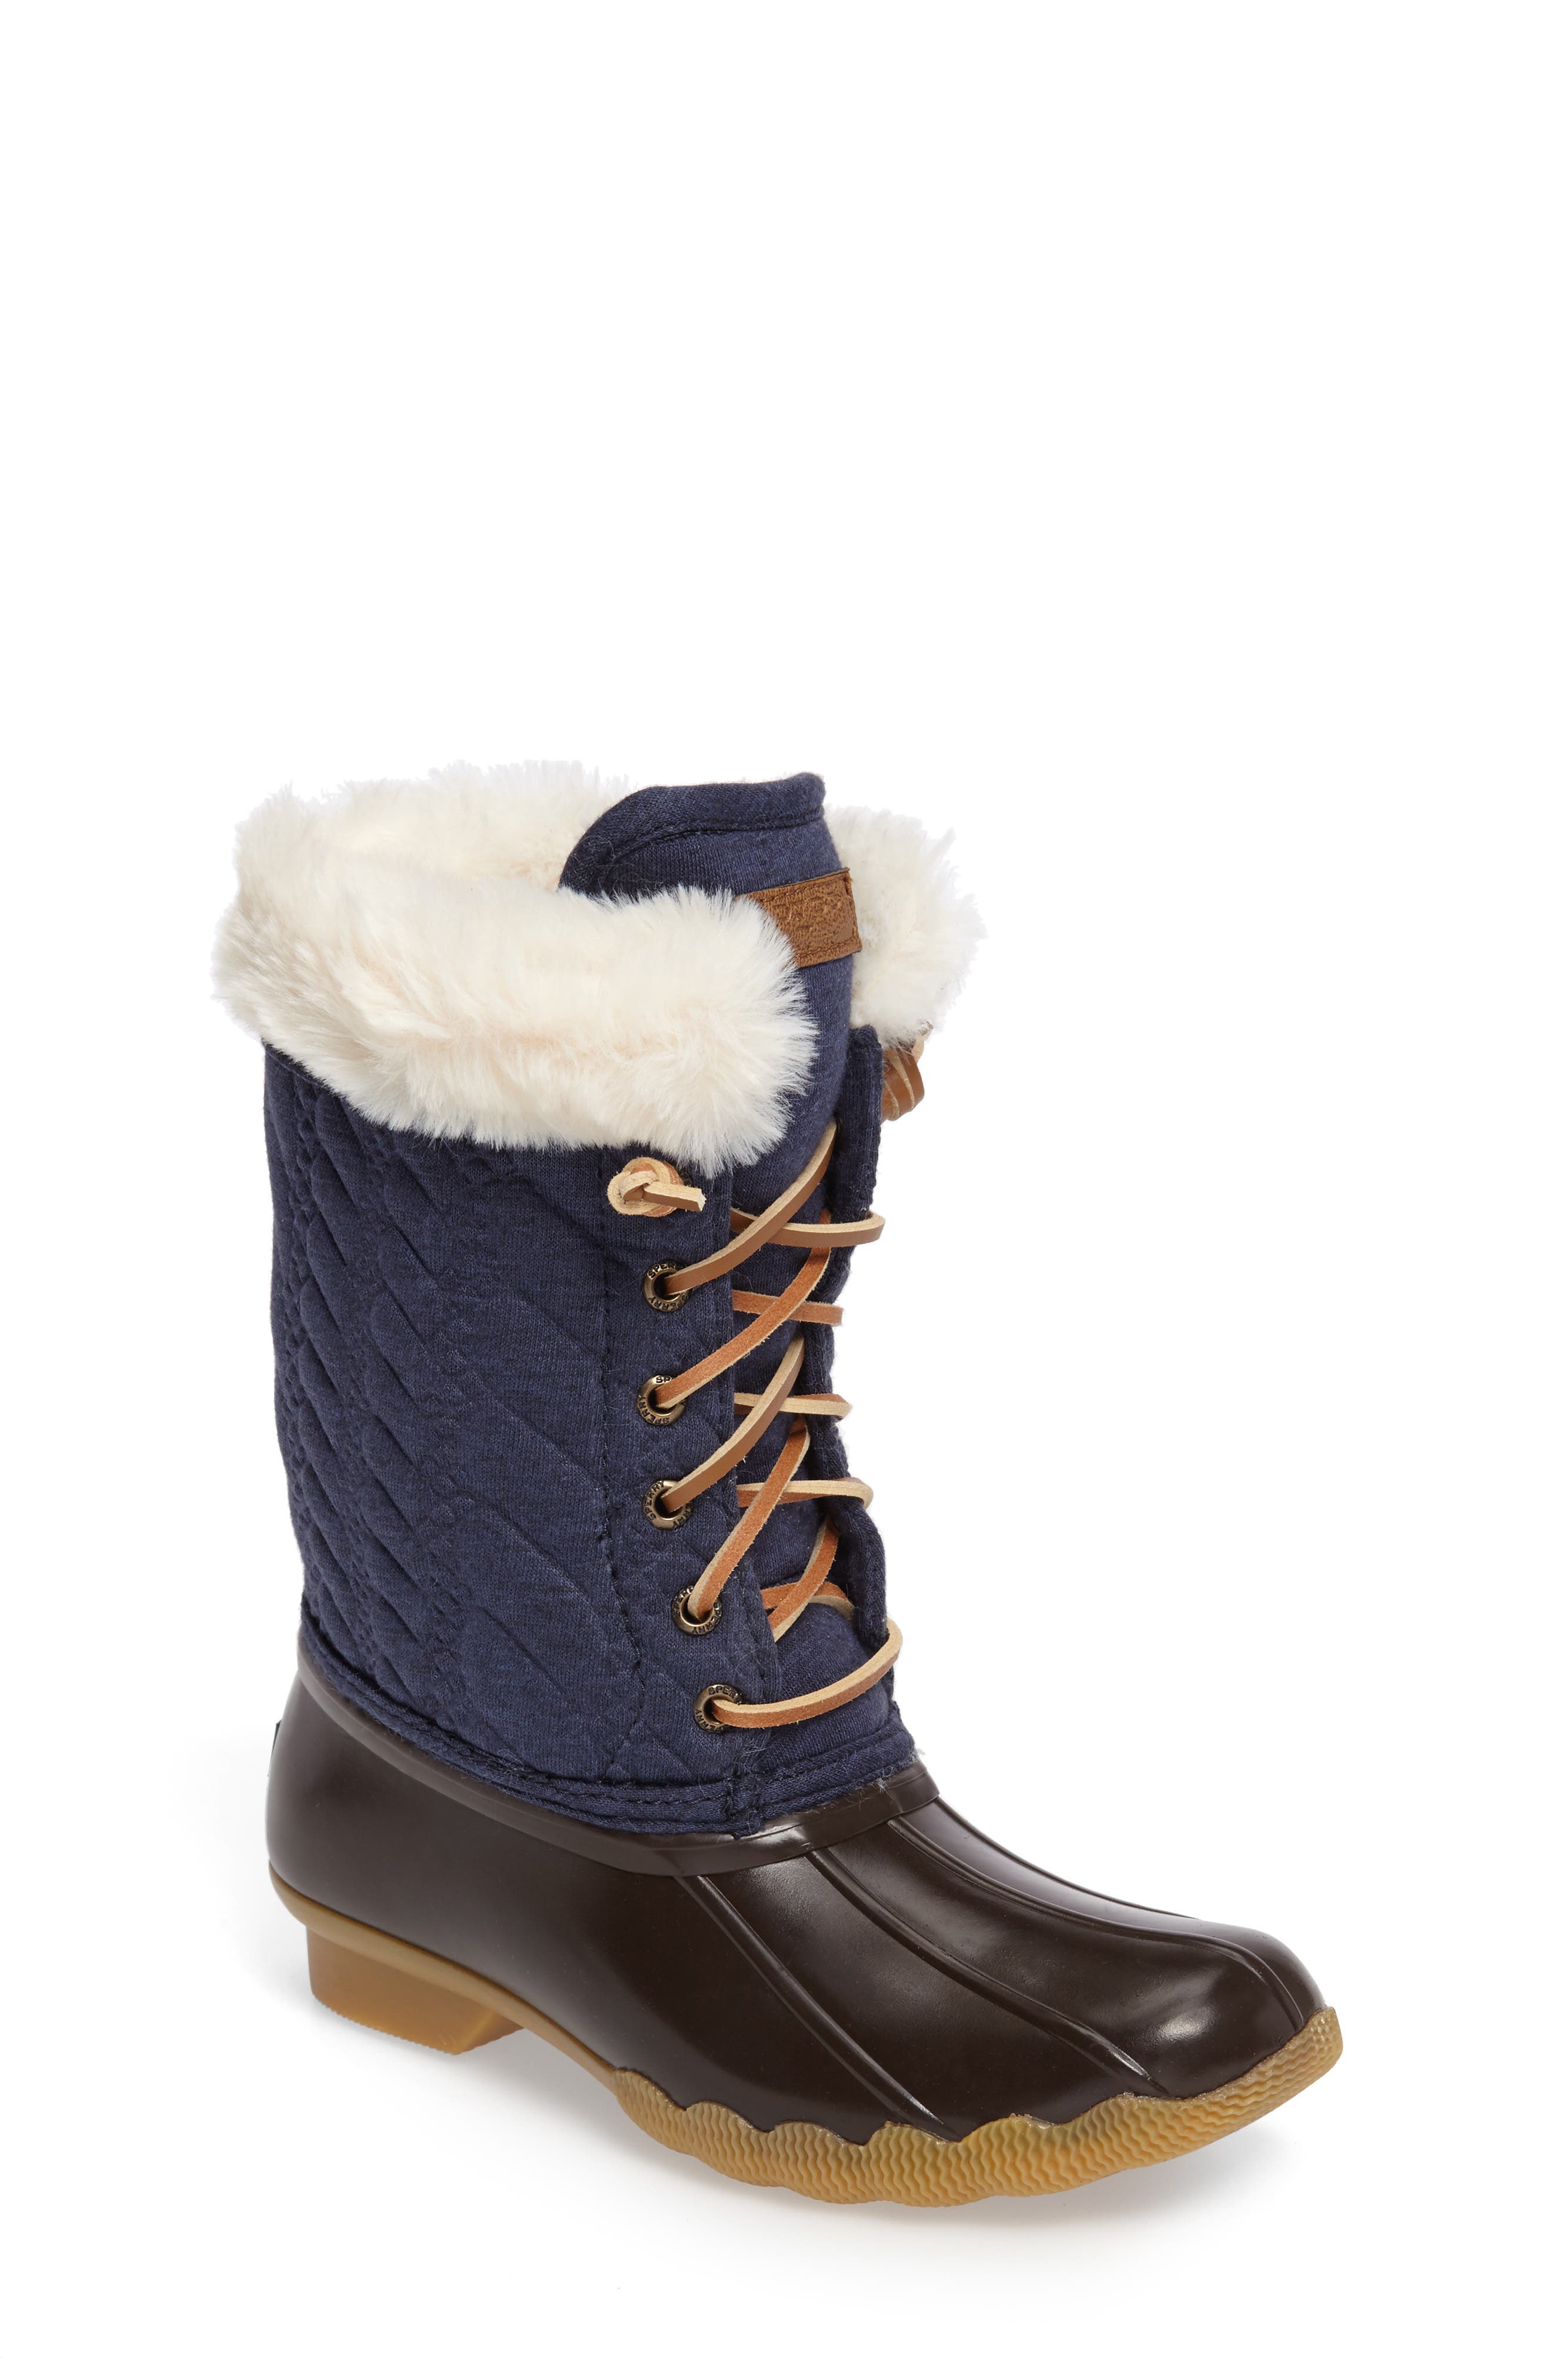 sperry duck boots with fur